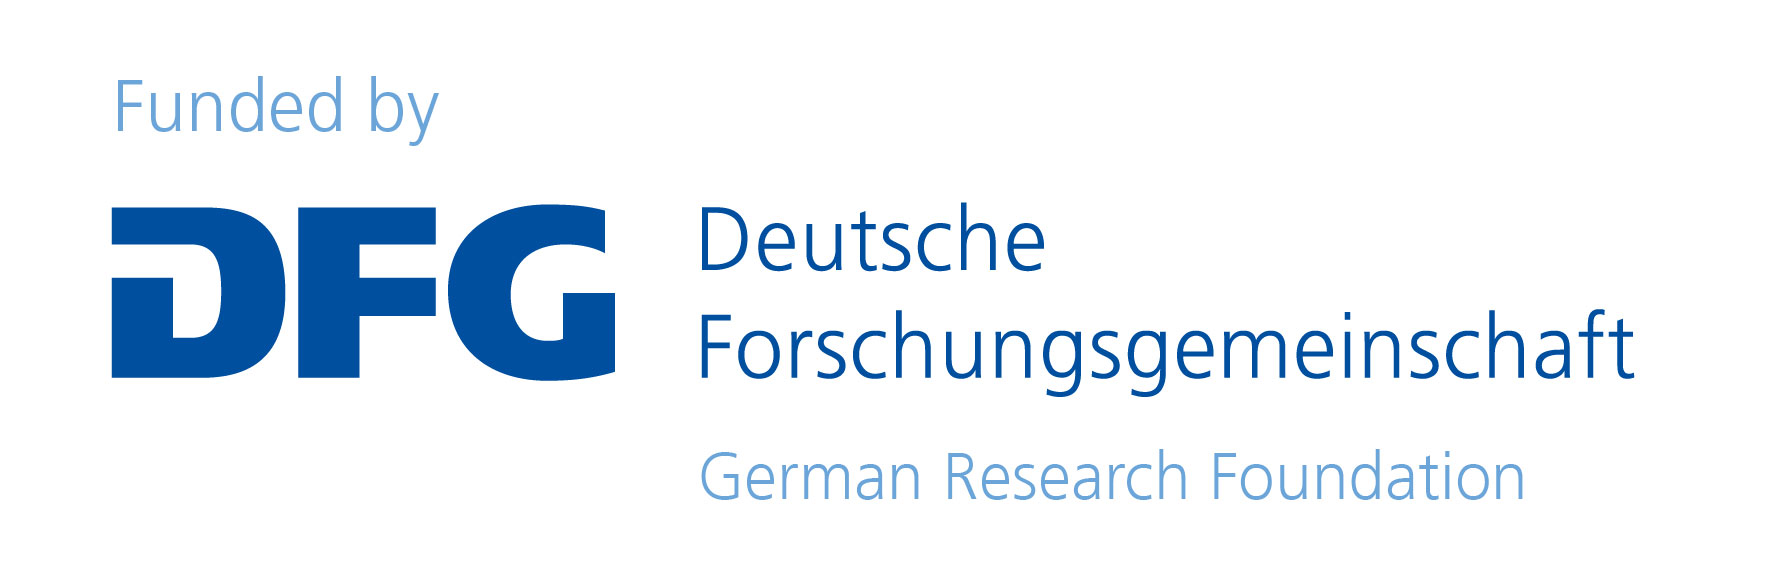 Funded by German Research Foundation (DFG)